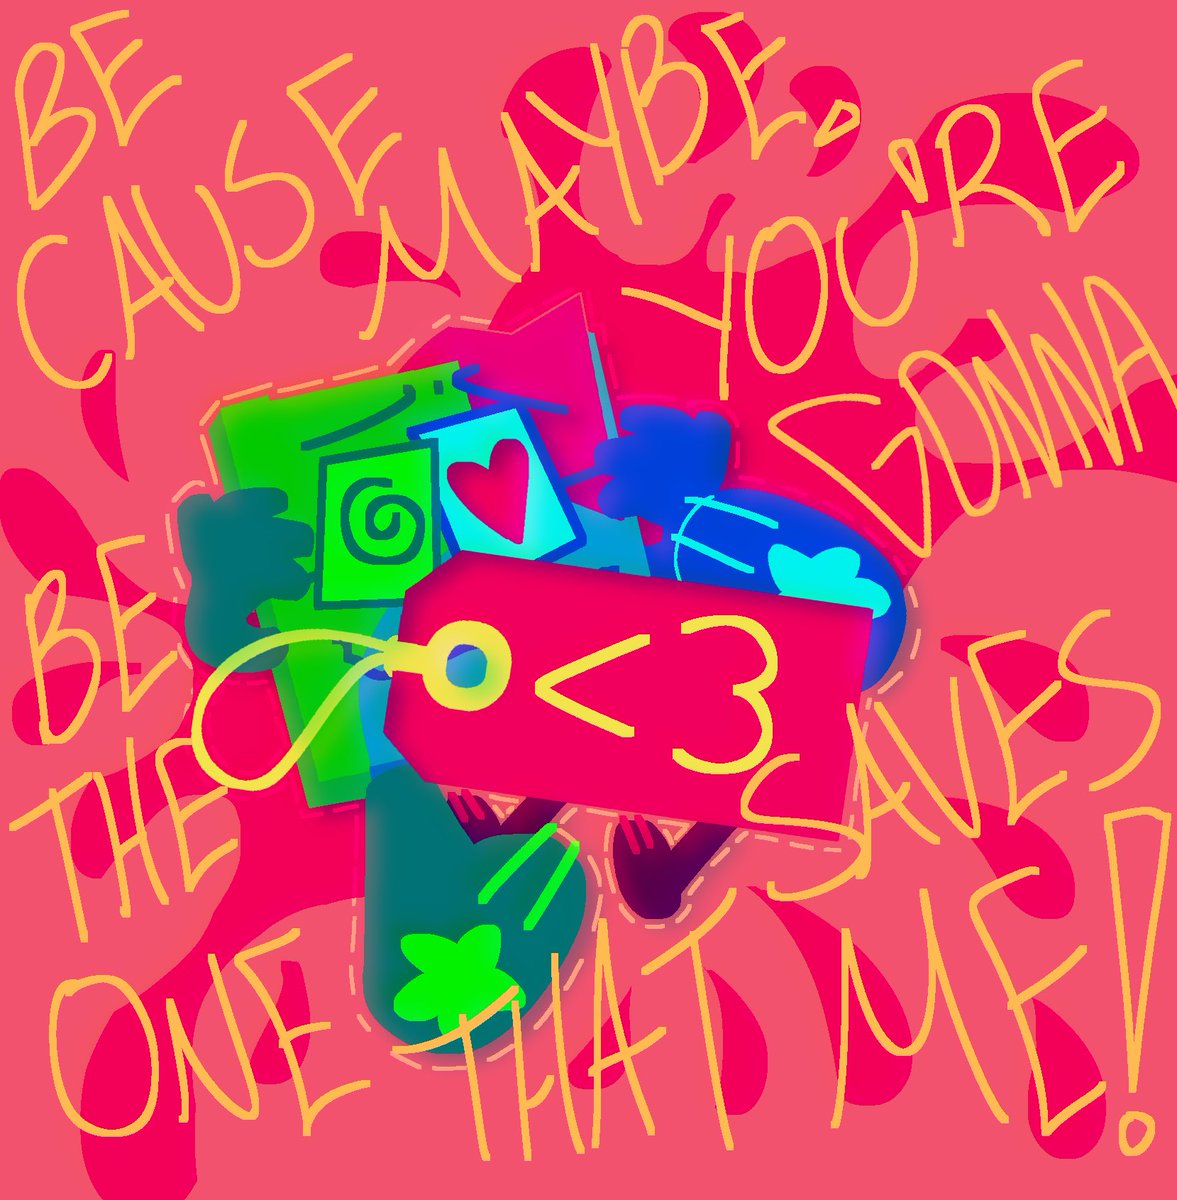 // booktag , pricebook , bright colors , eyestrain 

BECAUSE MAYBEEEEEE , YOU'RE GONNA BE THE ONE THAT SAVES MEEEEE !! #bfdi #bfb #tpot #osc #objectshowcommunity

 [ alt version in replies ]